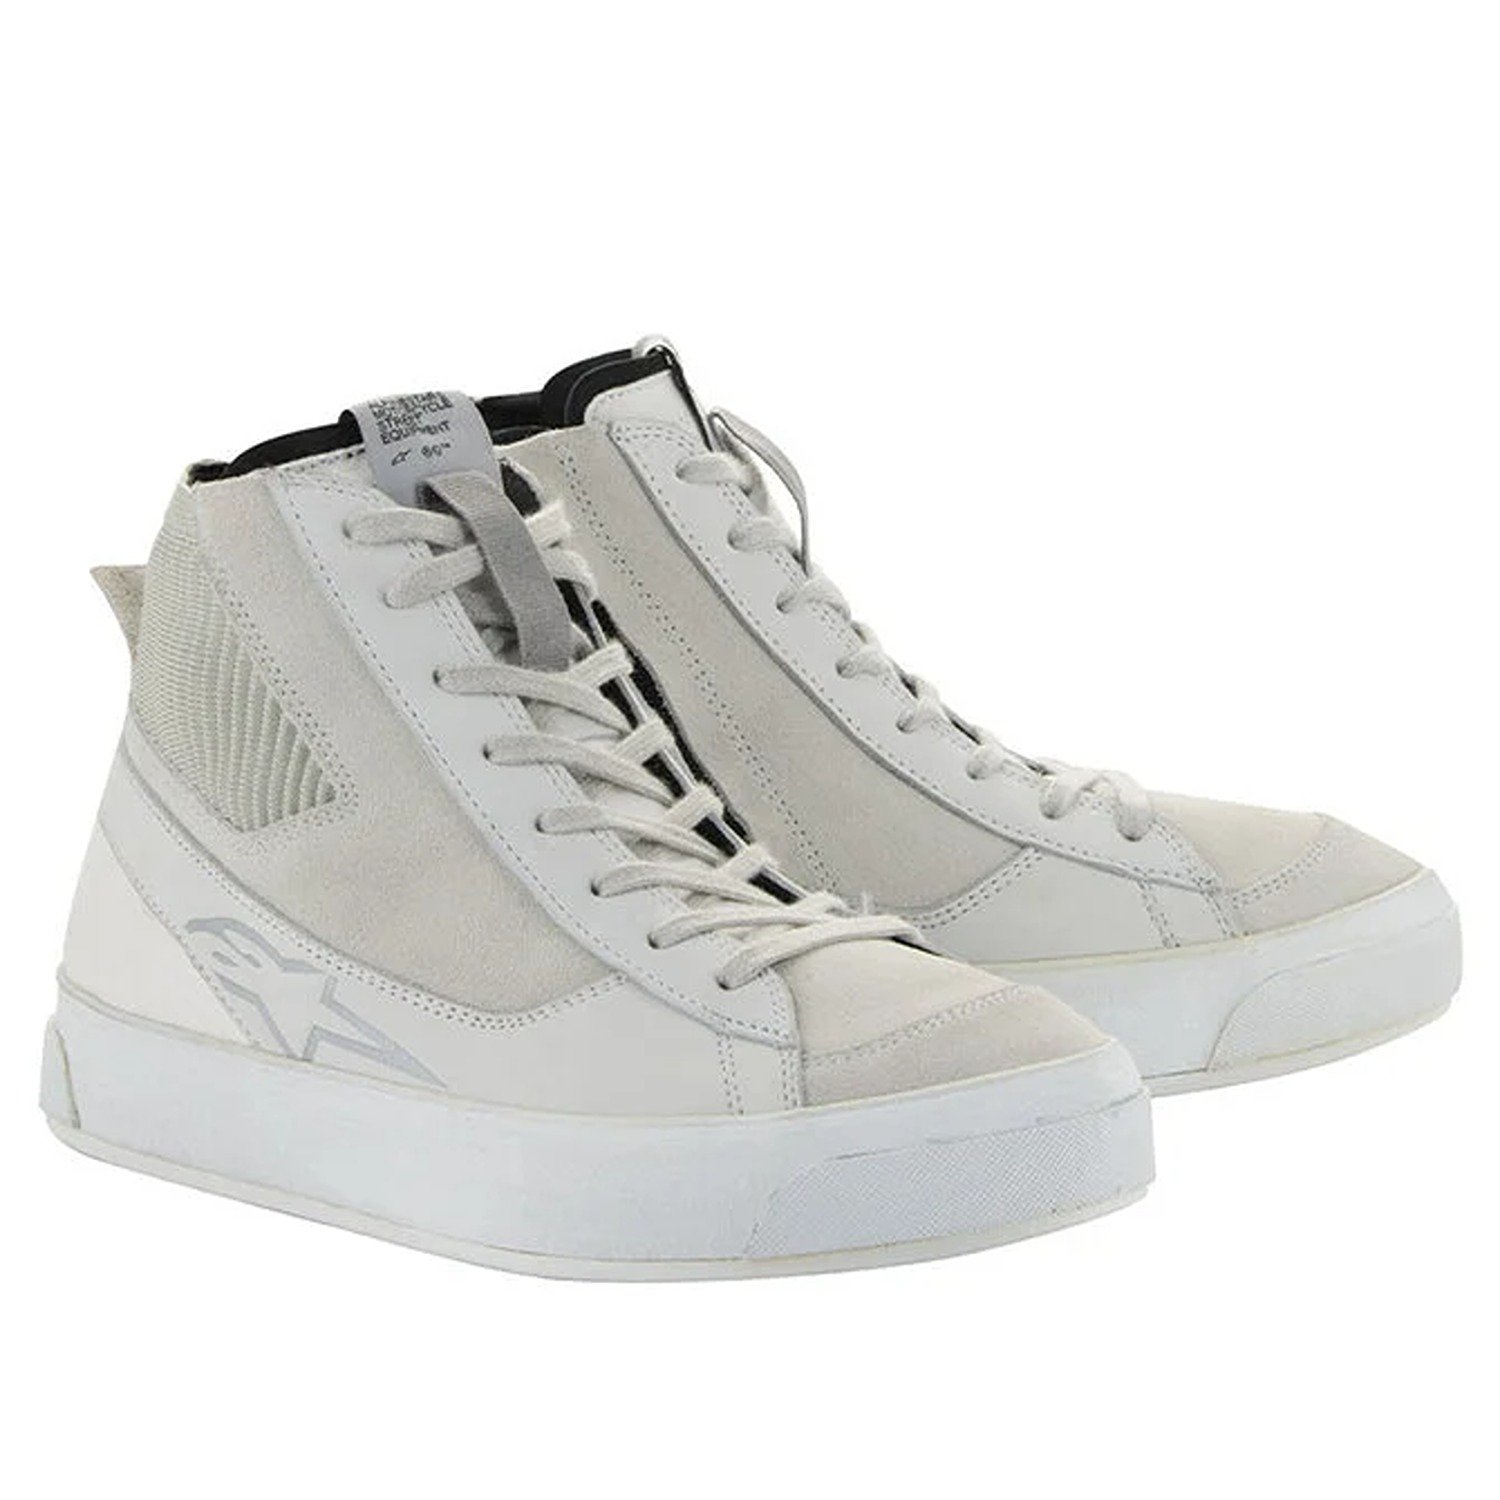 Image of Alpinestars Stated Shoes White Cool Gray Größe US 95